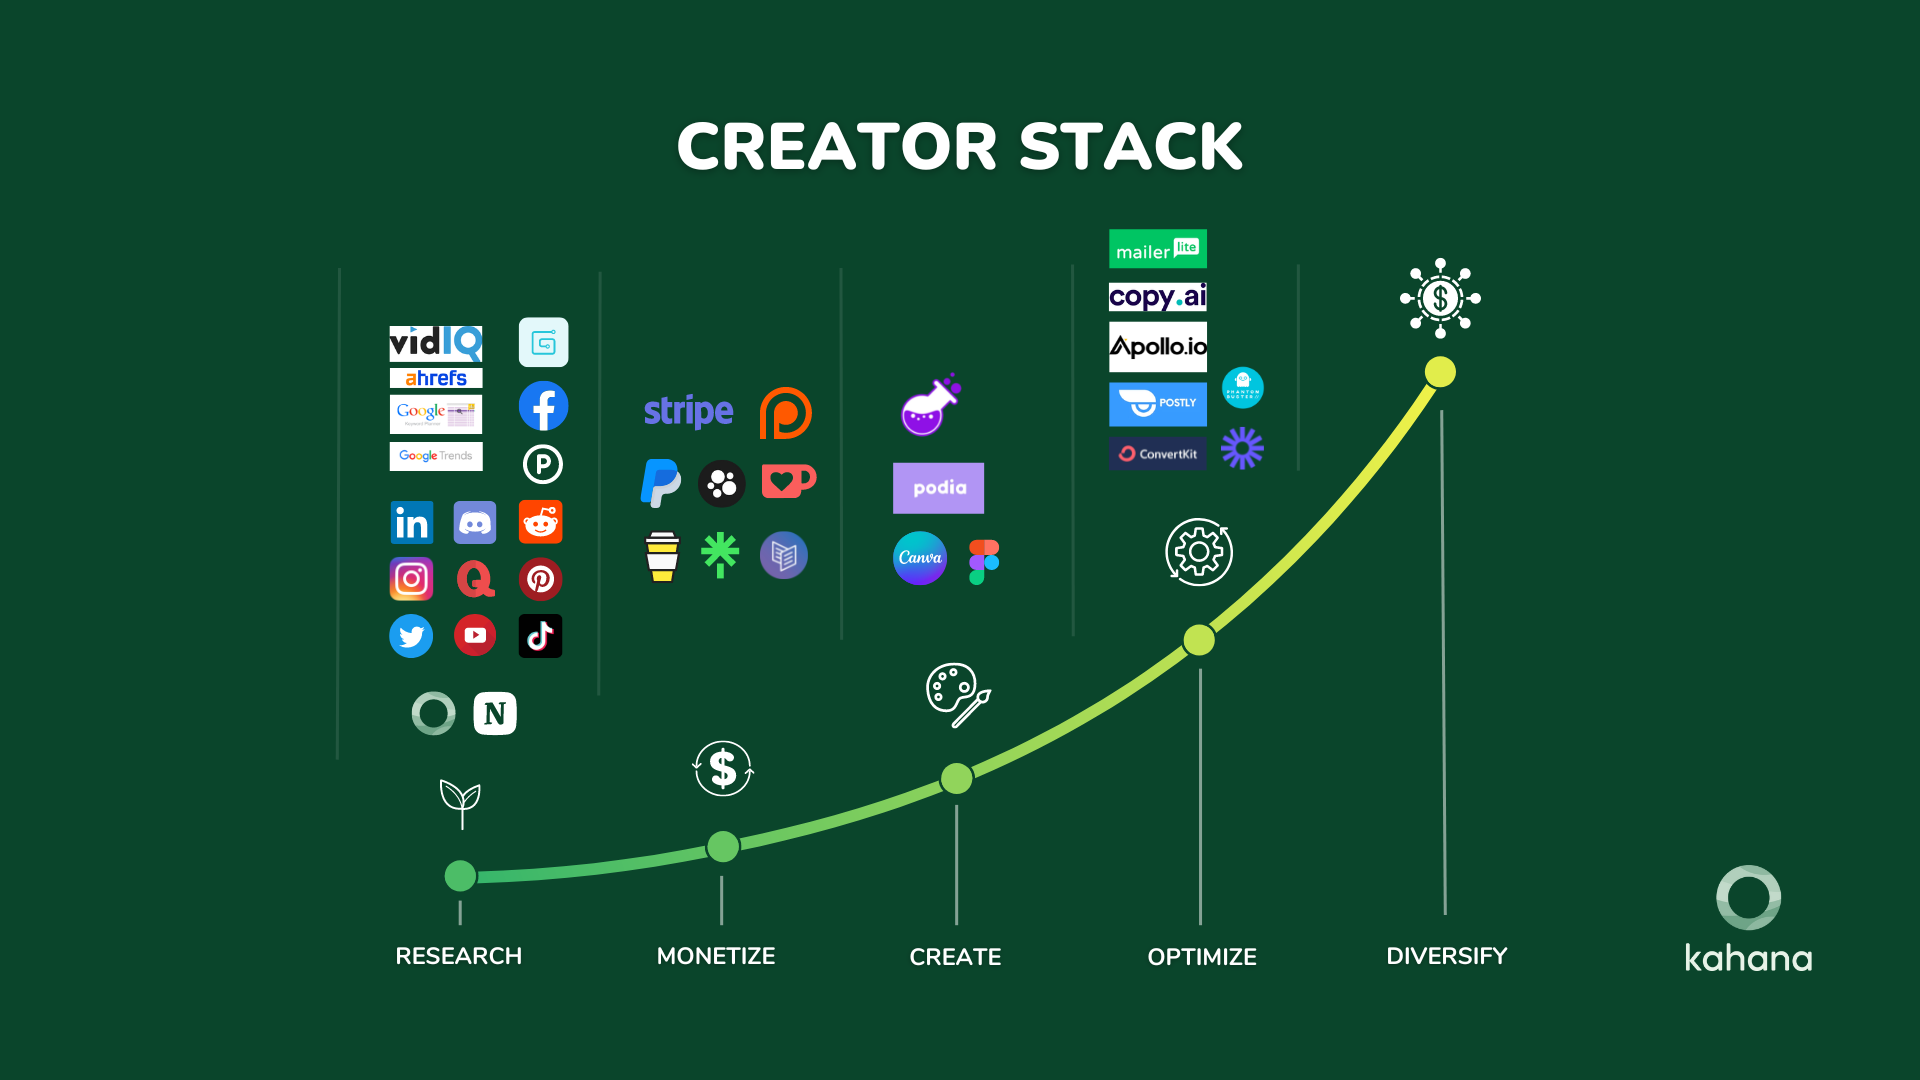 Creator Stack Infographic depicting the Kahana Model to Achieve "1000 True Fans"